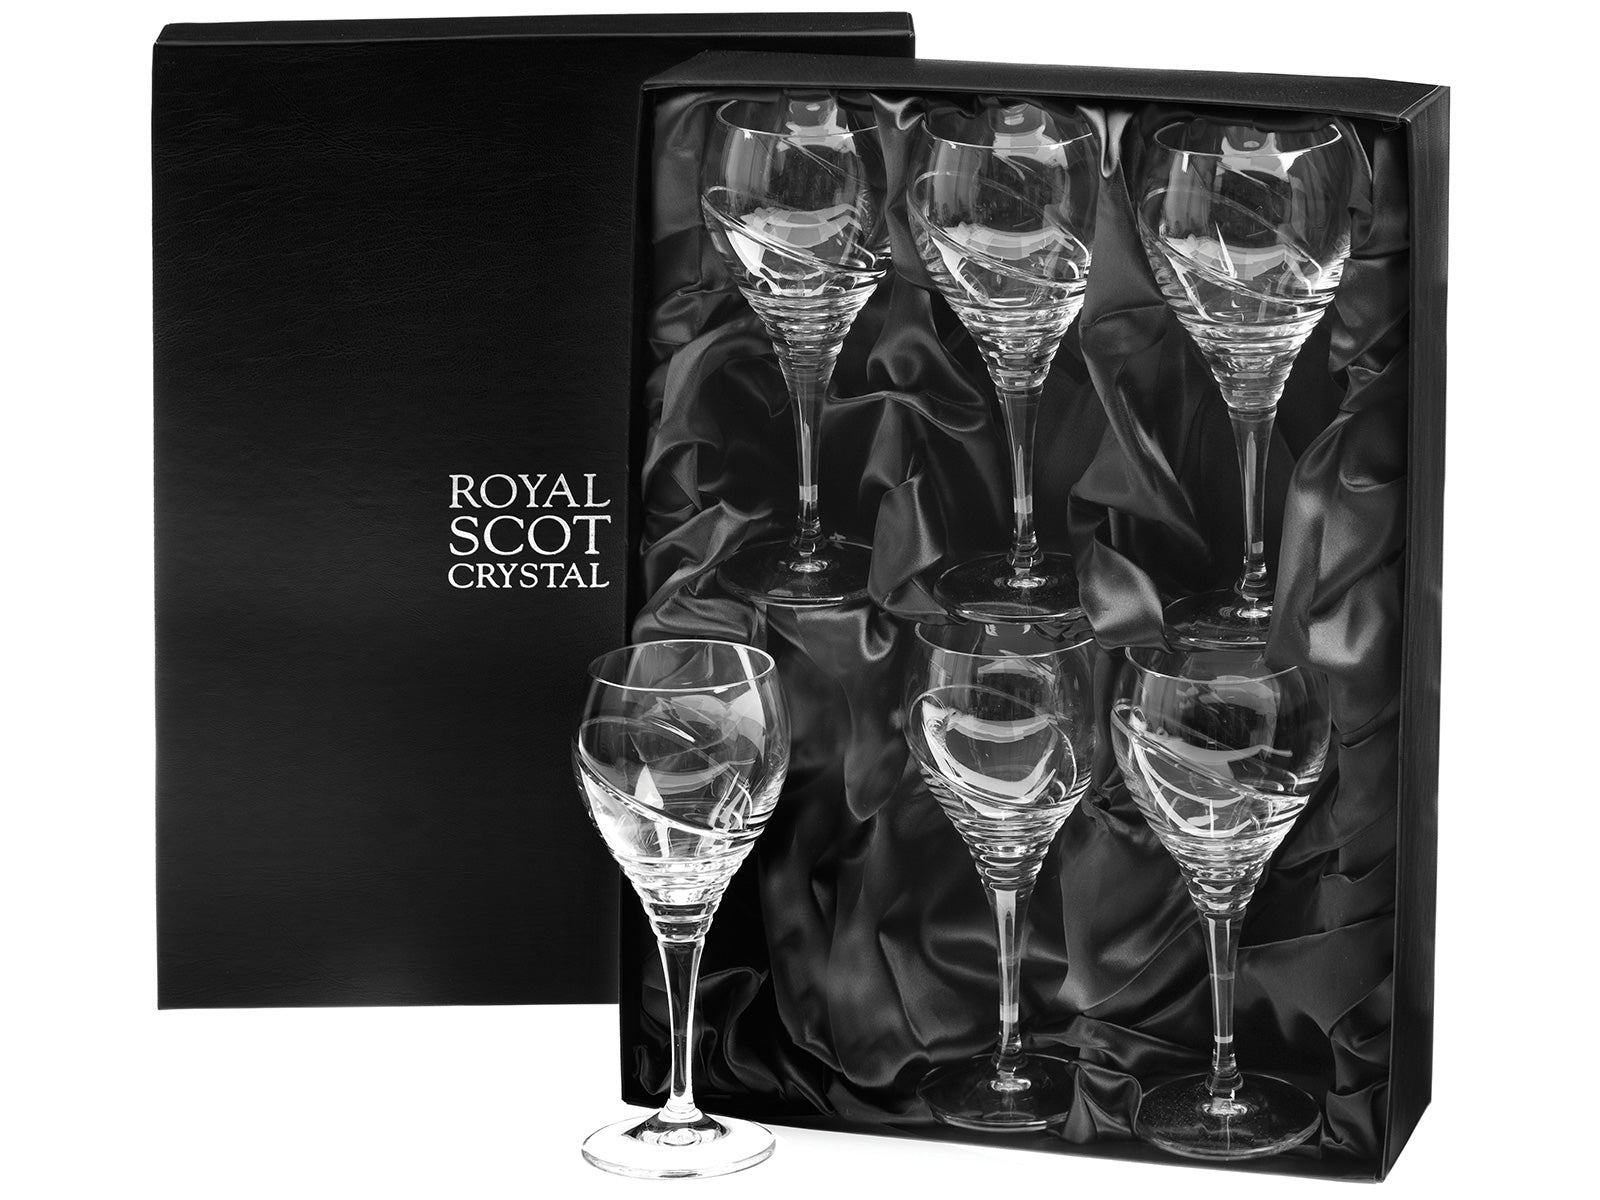 A set of six crystal wine glasses with an orbital pattern cut into the outside. They come in a dark grey presentation box